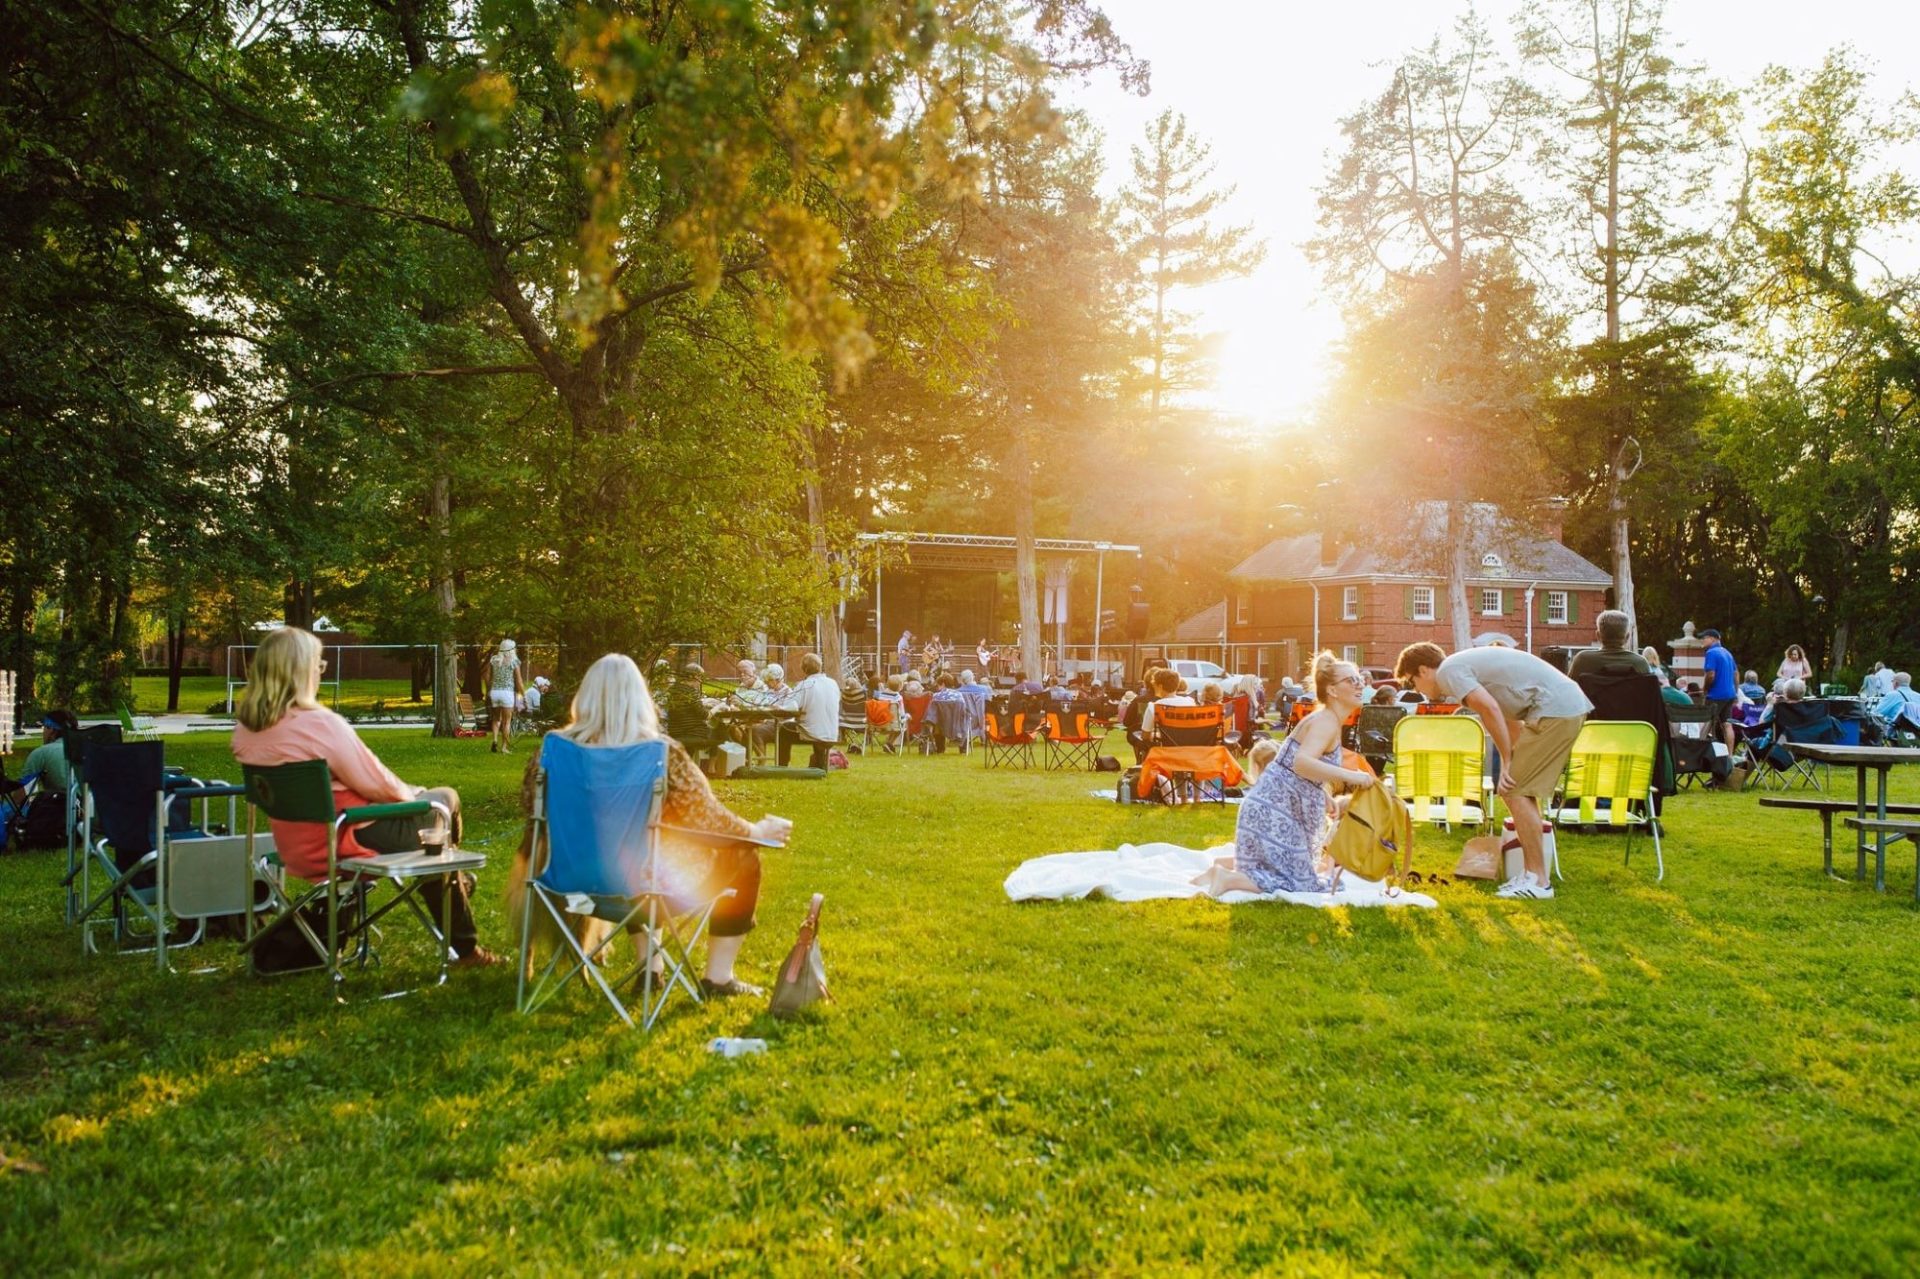 An outdoor concert with people gathered on a grassy lawn on blankets and in chairs. The sun is setting behind the trees.